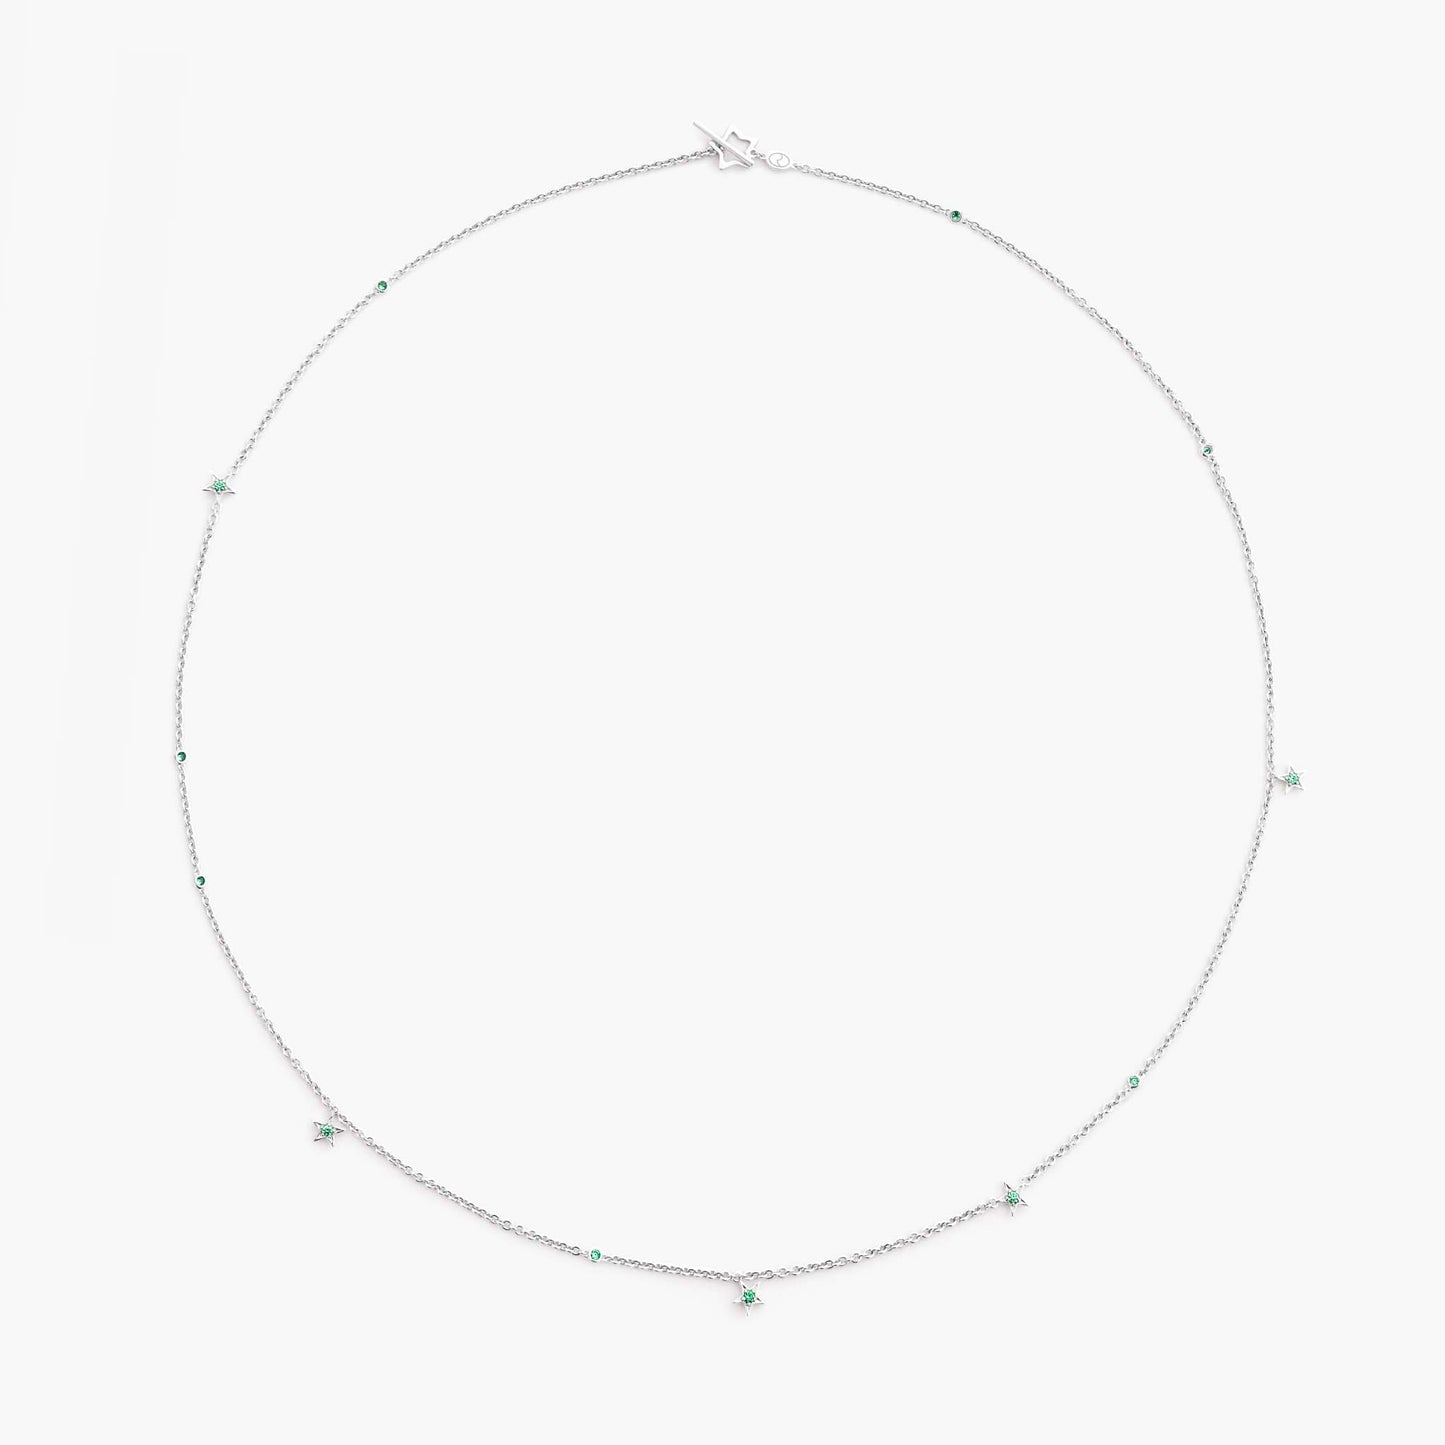 Guiding Star 18ct White Gold & Emerald Necklace, 70cm